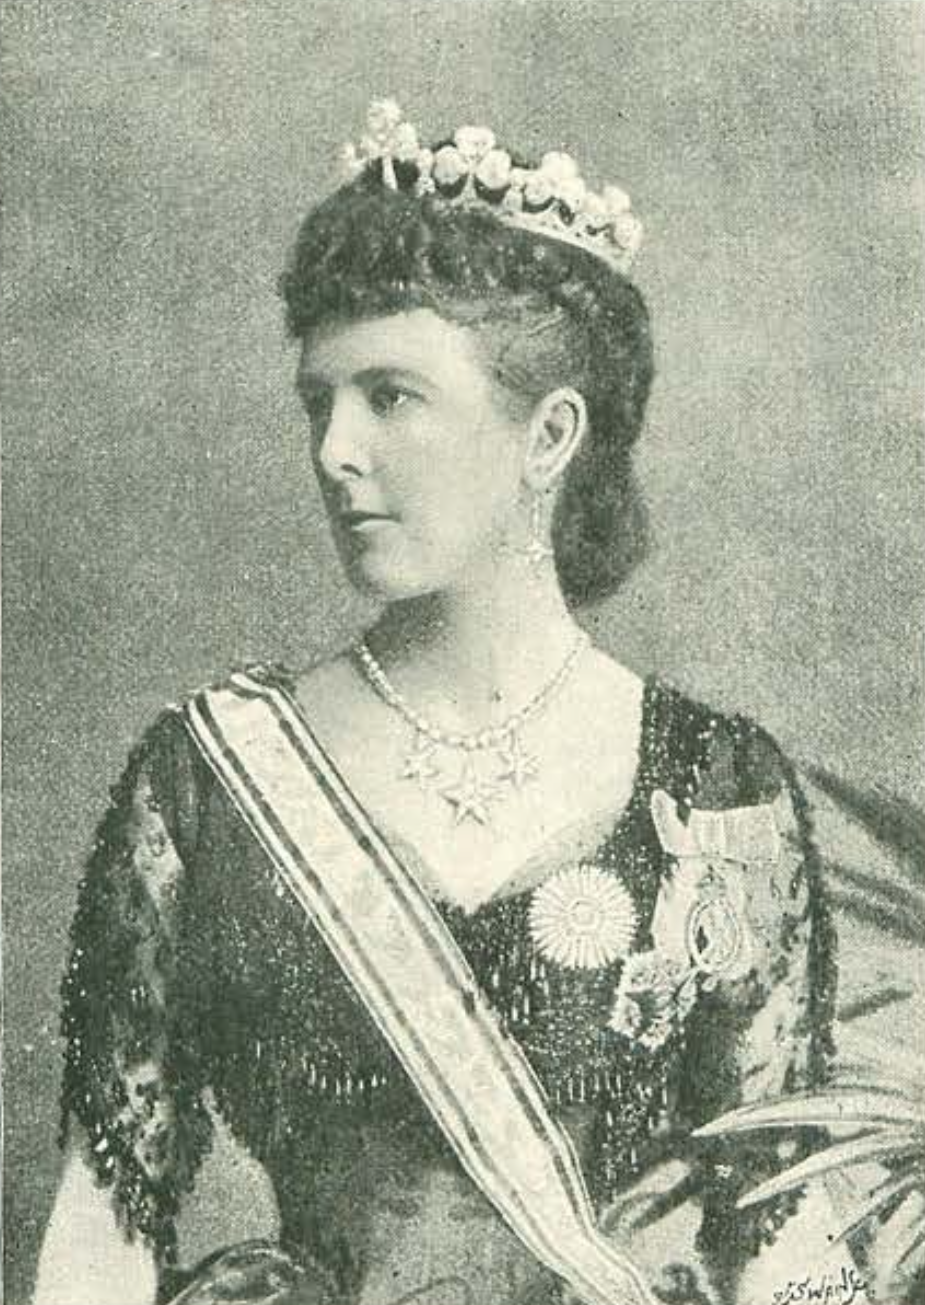 Portrait of a white woman seated and facing left. She is wearing a jewelled headdress and ornate clothing with medals and jewels.